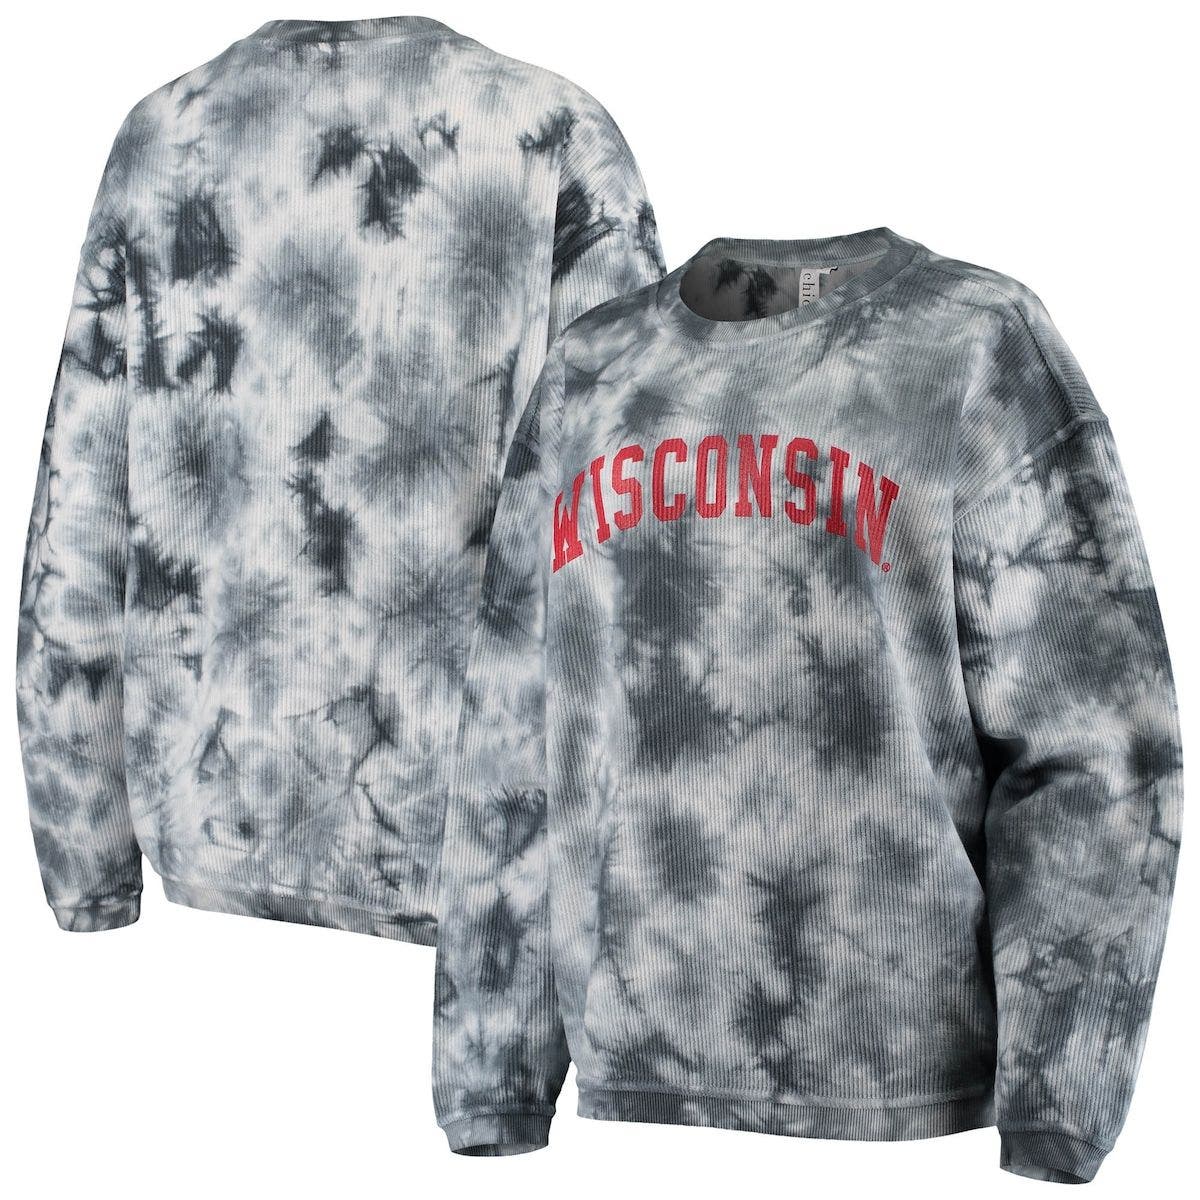 CHICKA-D Women's chicka-d White/Charcoal Wisconsin Badgers Tie Dye Corded Pullover Sweatshirt at Nordstrom